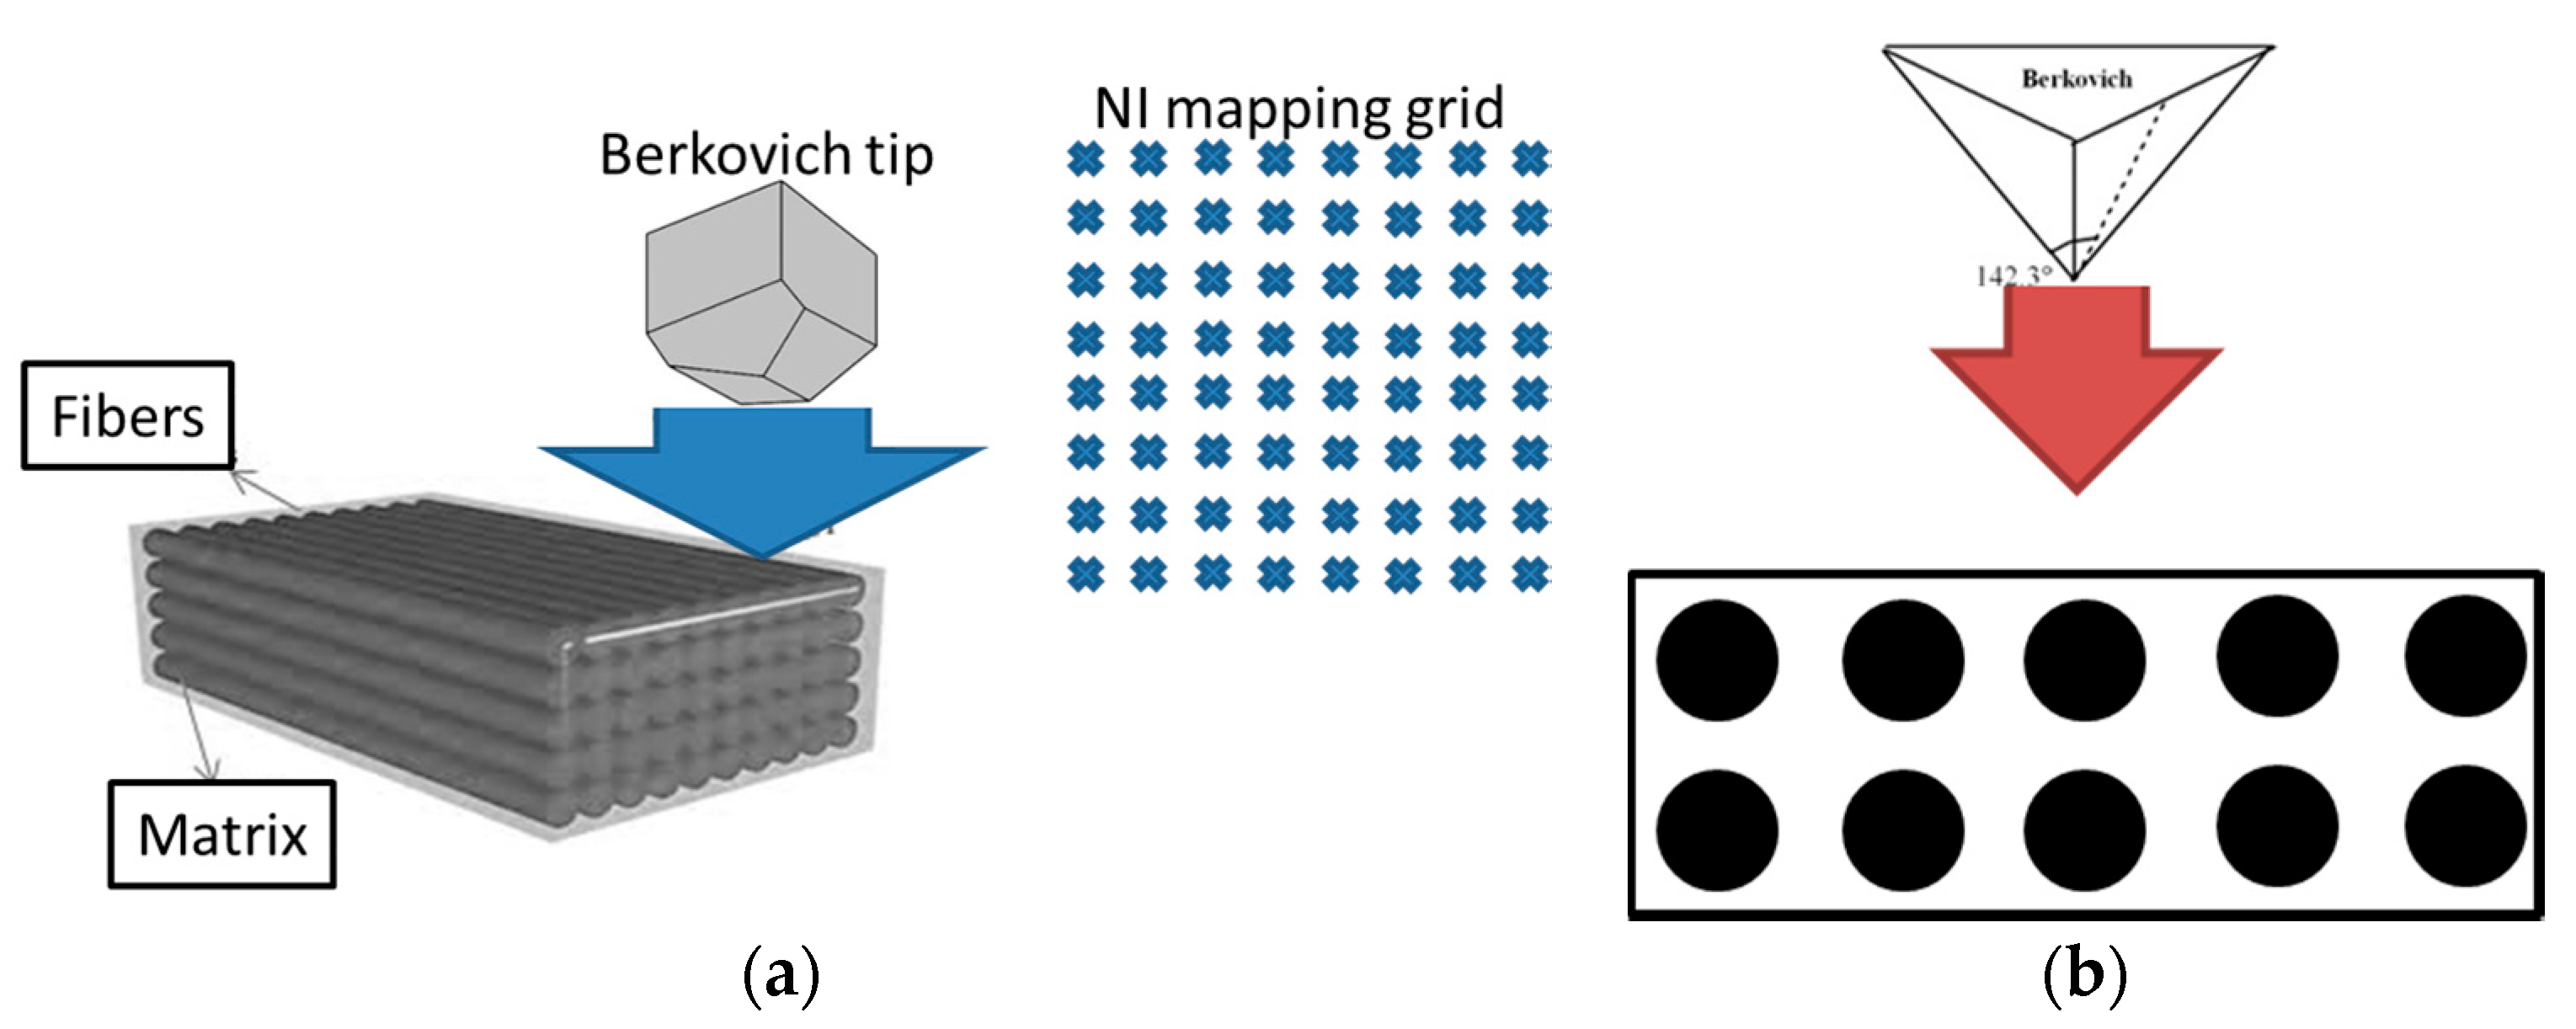 grid mapping protocol